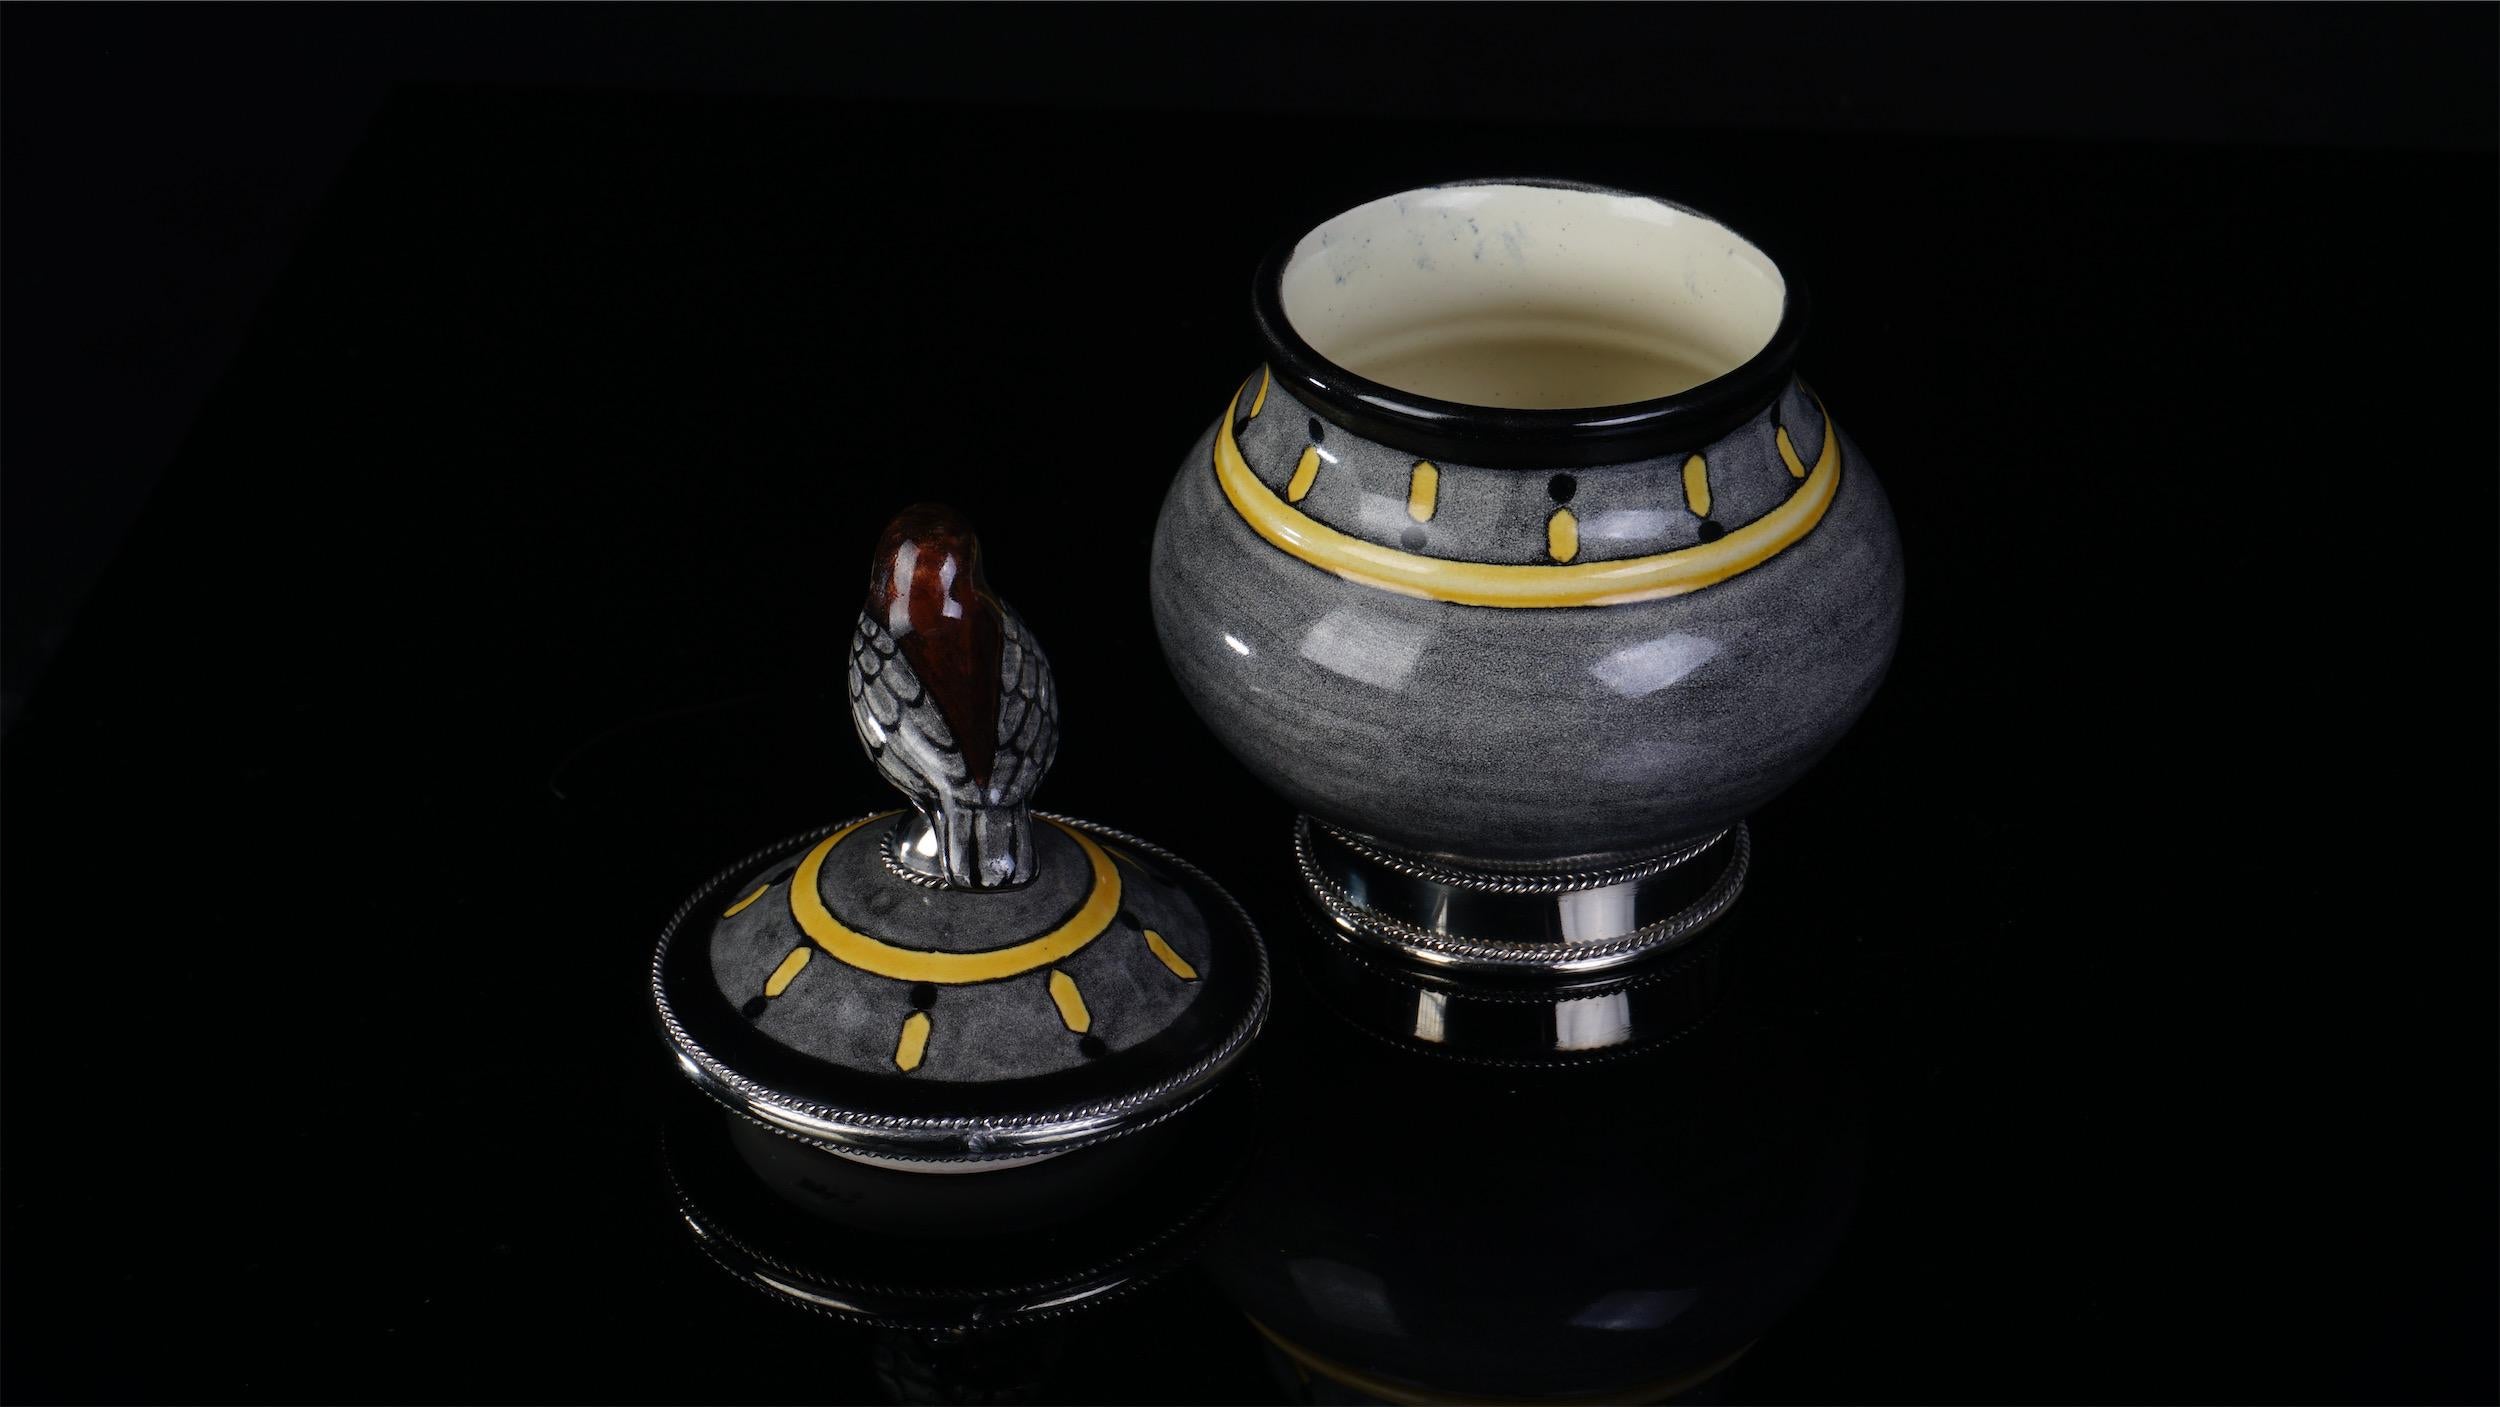 Always unique pieces is what you are going to hear about Jesus Guerrero Santo's work, all the pieces are handmade and created one by one it takes months to produce each peace.
This ceramica and white metal (alpaca) bowl centrepiece, was created in